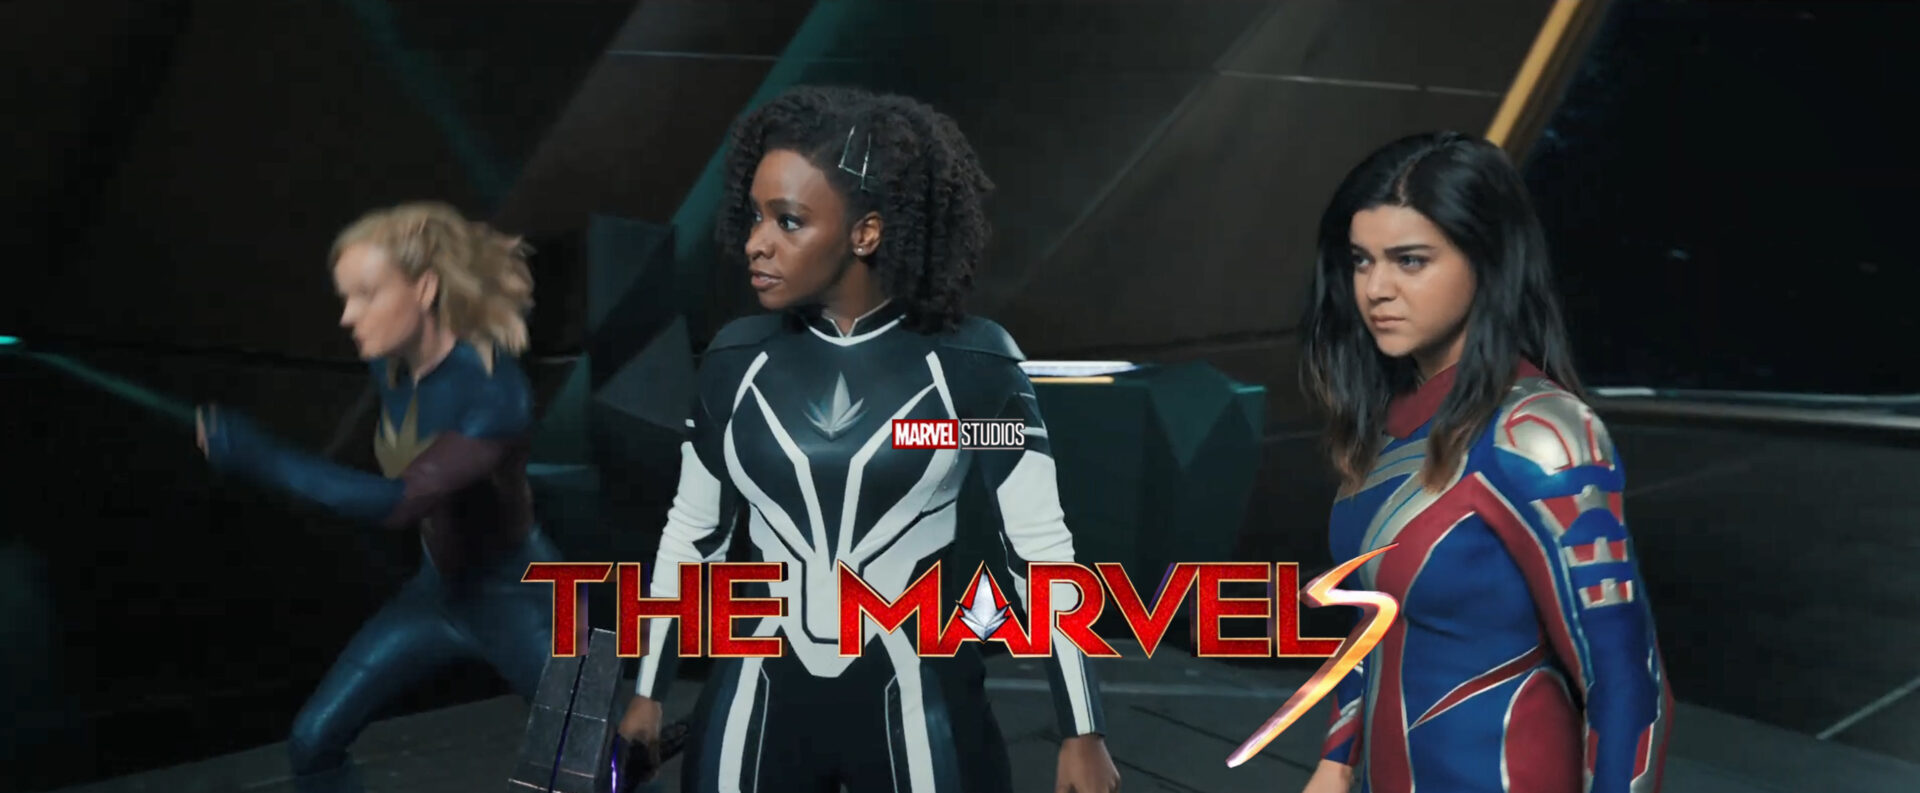 The Marvels theatrical trailer banner